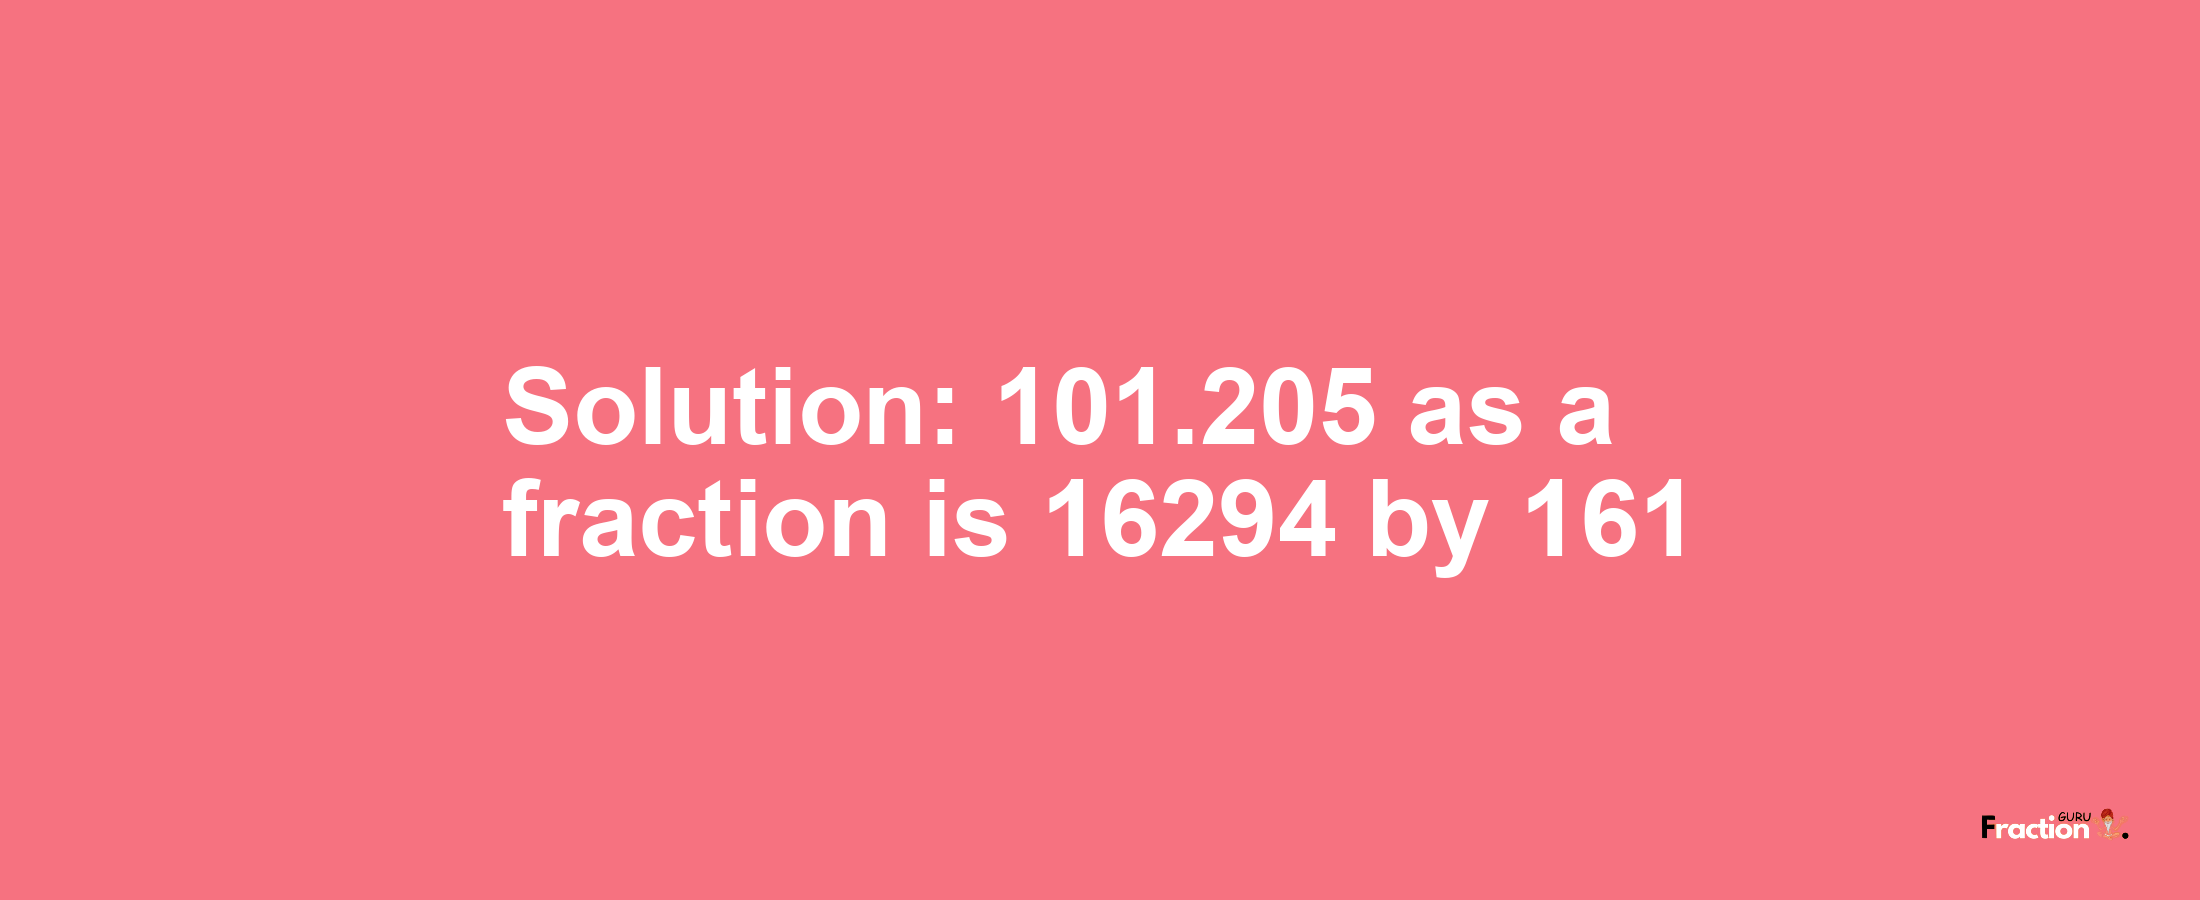 Solution:101.205 as a fraction is 16294/161